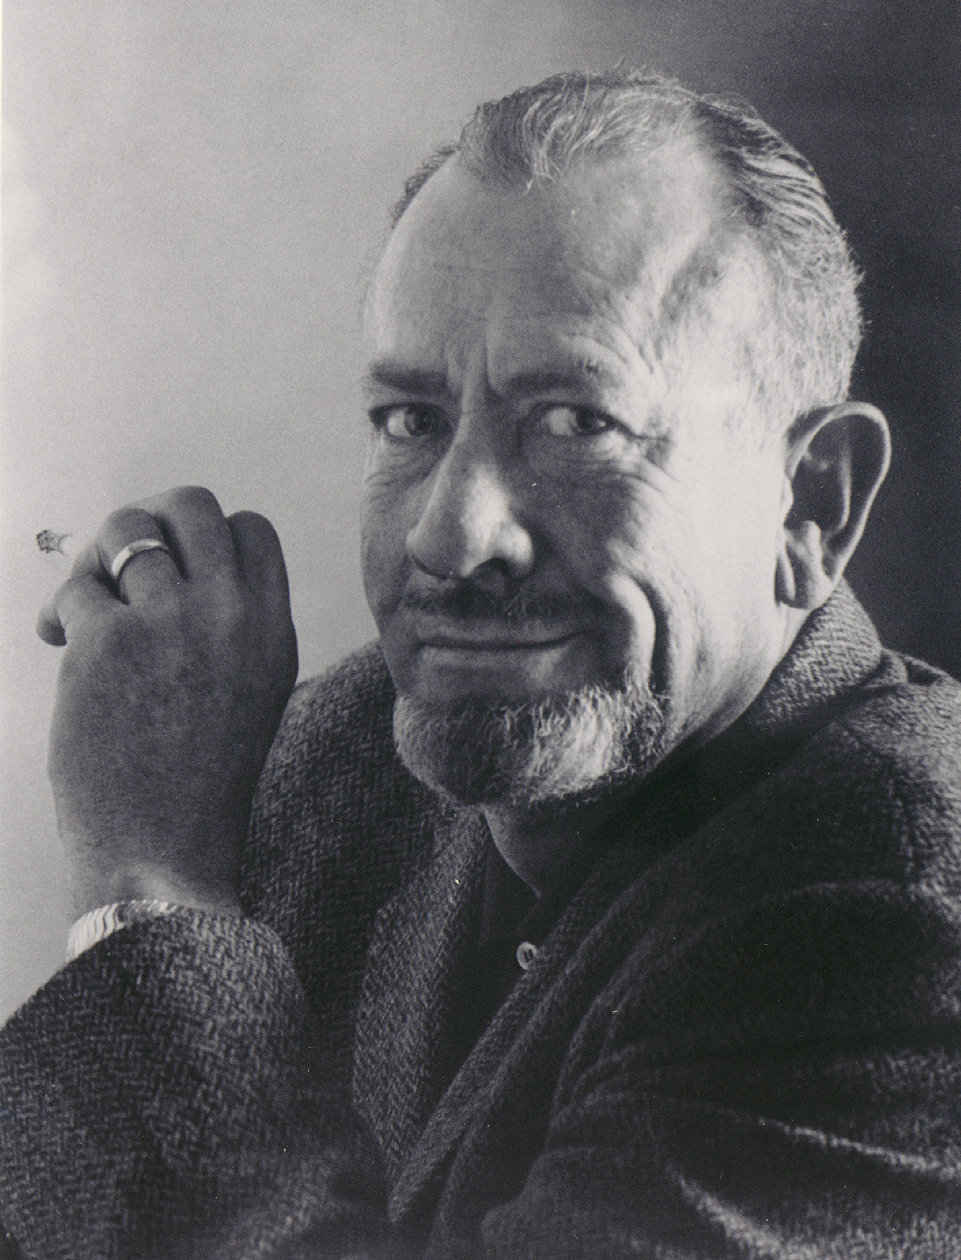 Steinbeck with cigarette 2